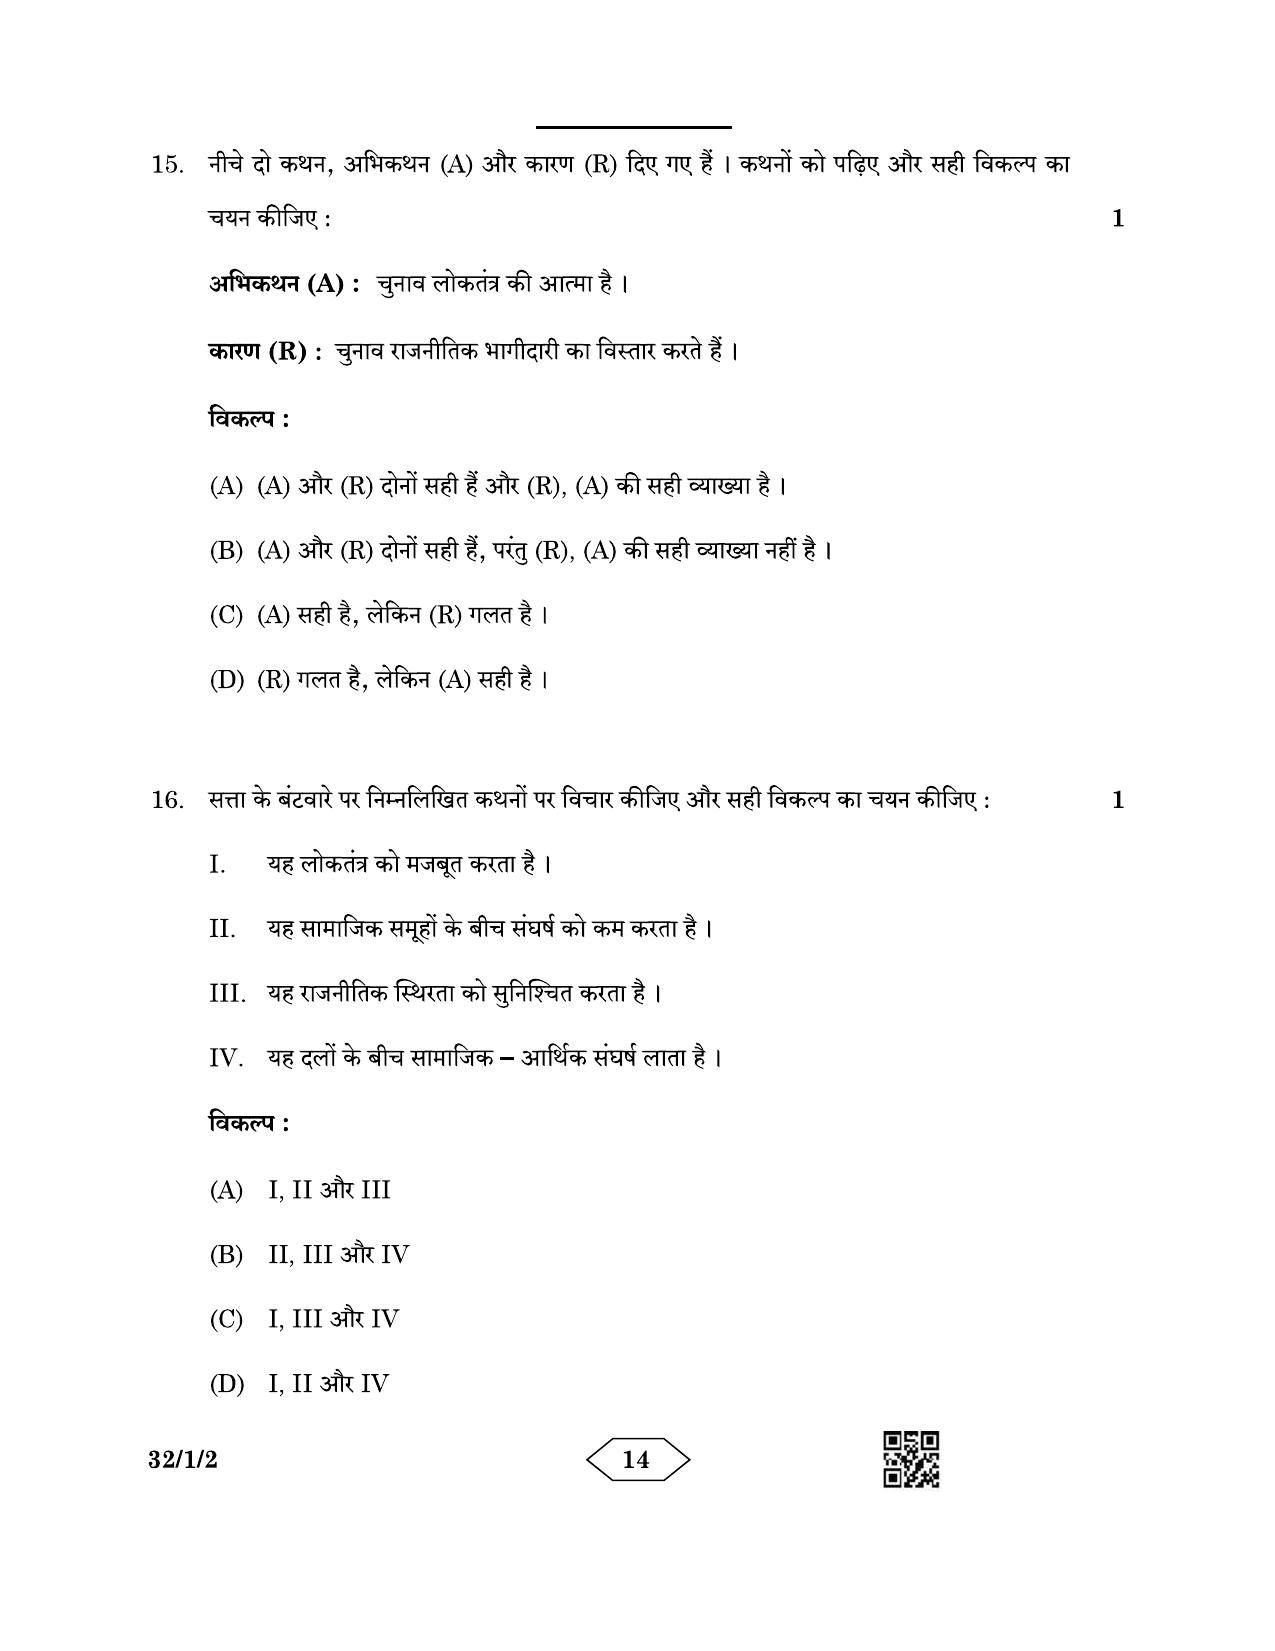 CBSE Class 10 32-1-2 Social Science 2023 Question Paper - Page 14